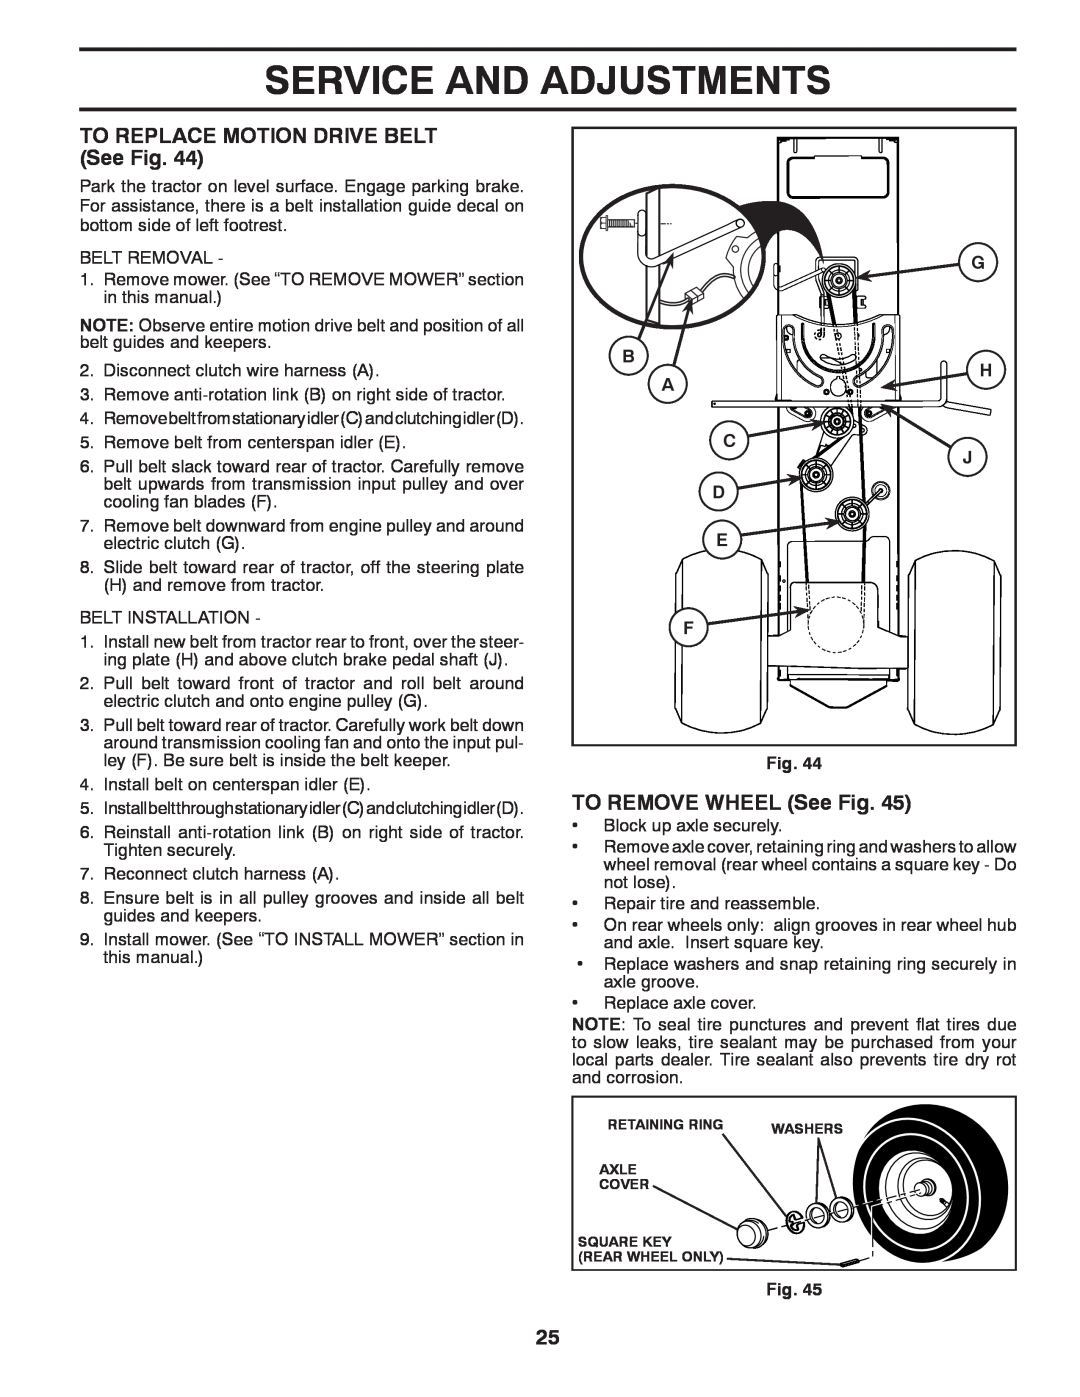 Husqvarna GT48XLSi warranty TO REPLACE MOTION DRIVE BELT See Fig, TO REMOVE WHEEL See Fig, Service And Adjustments 